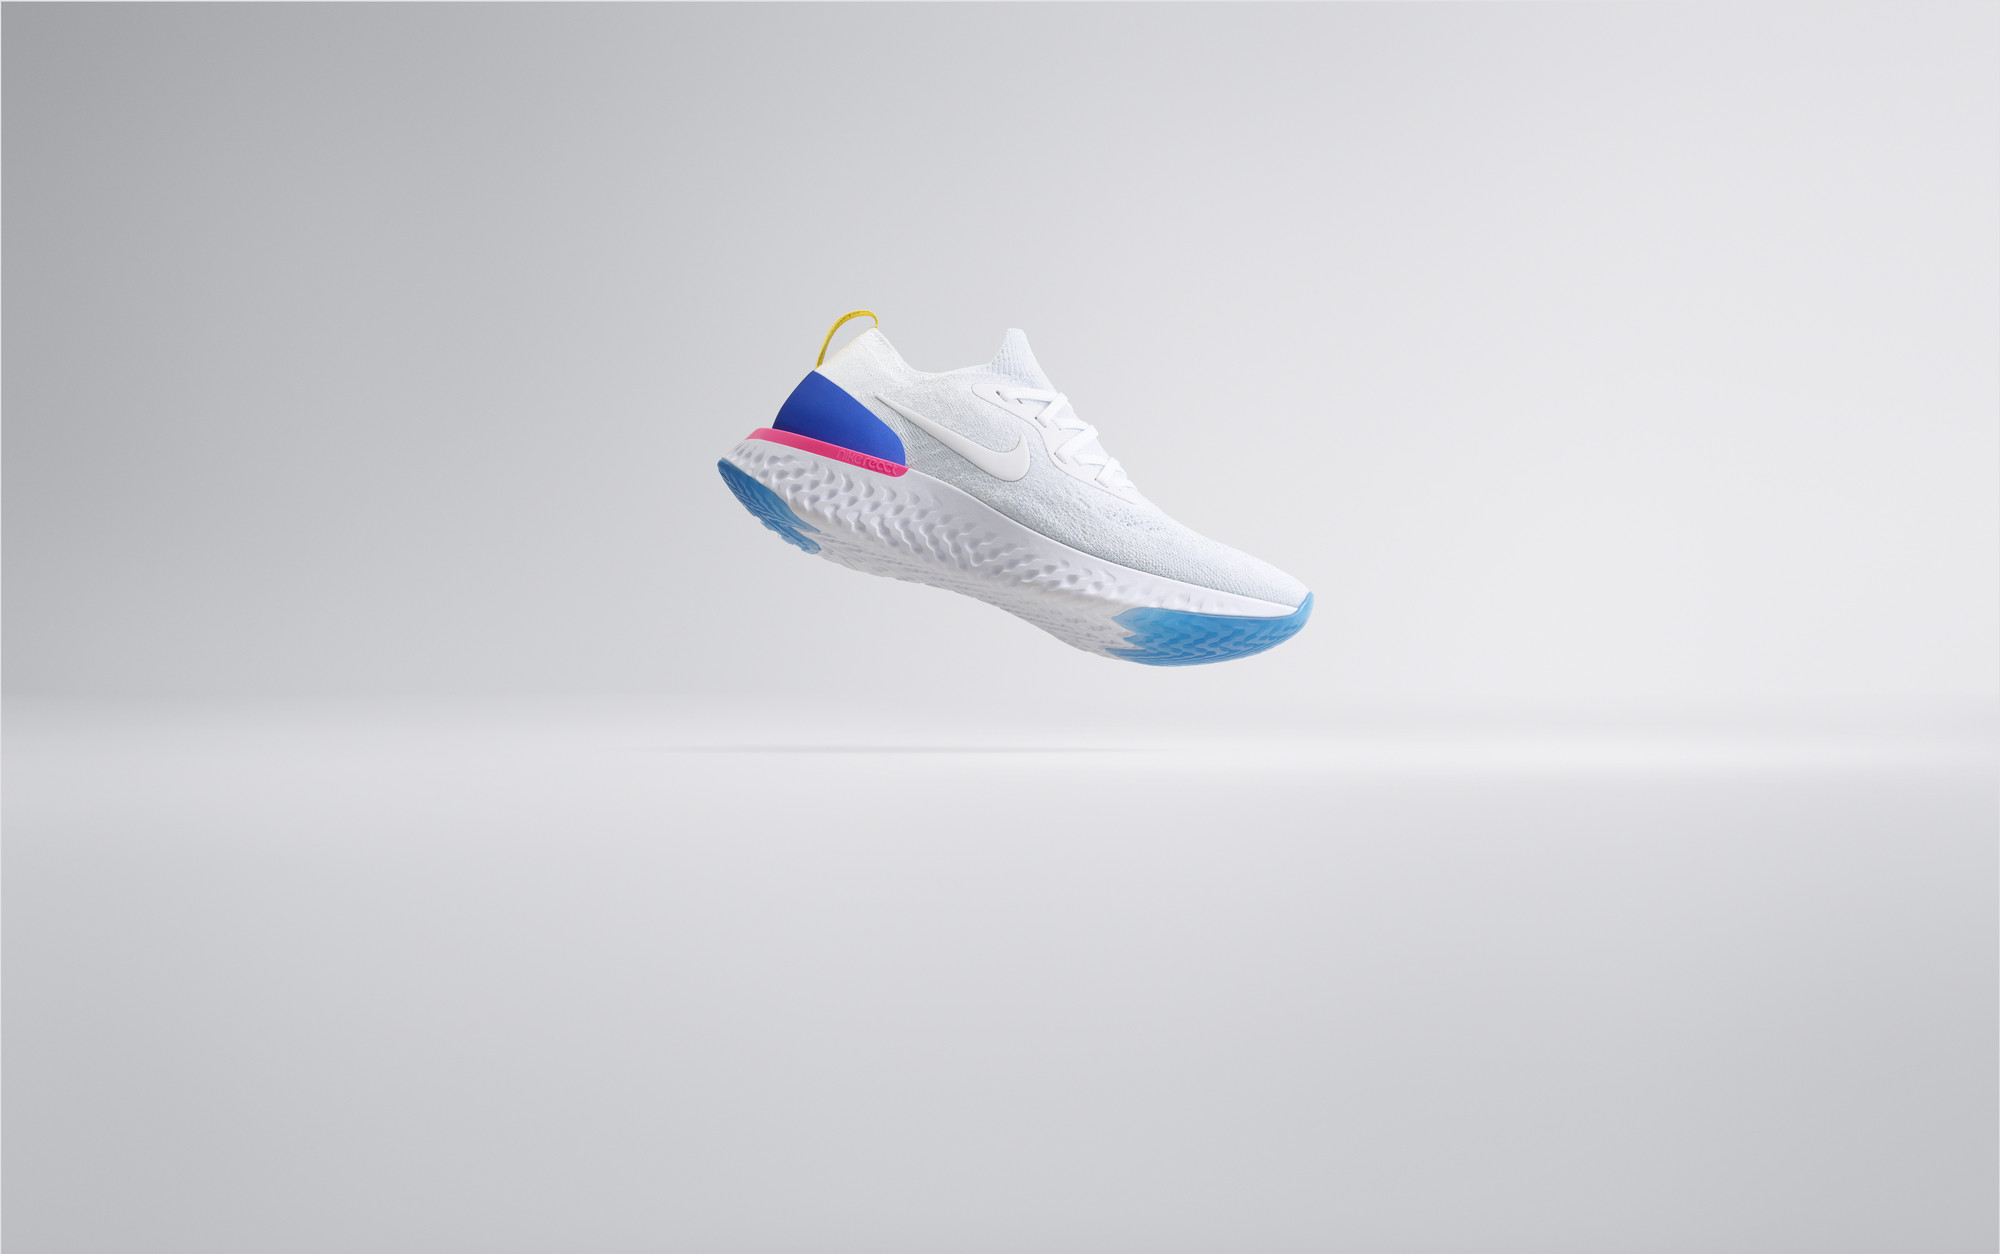 The Nike Epic React Flyknit is 